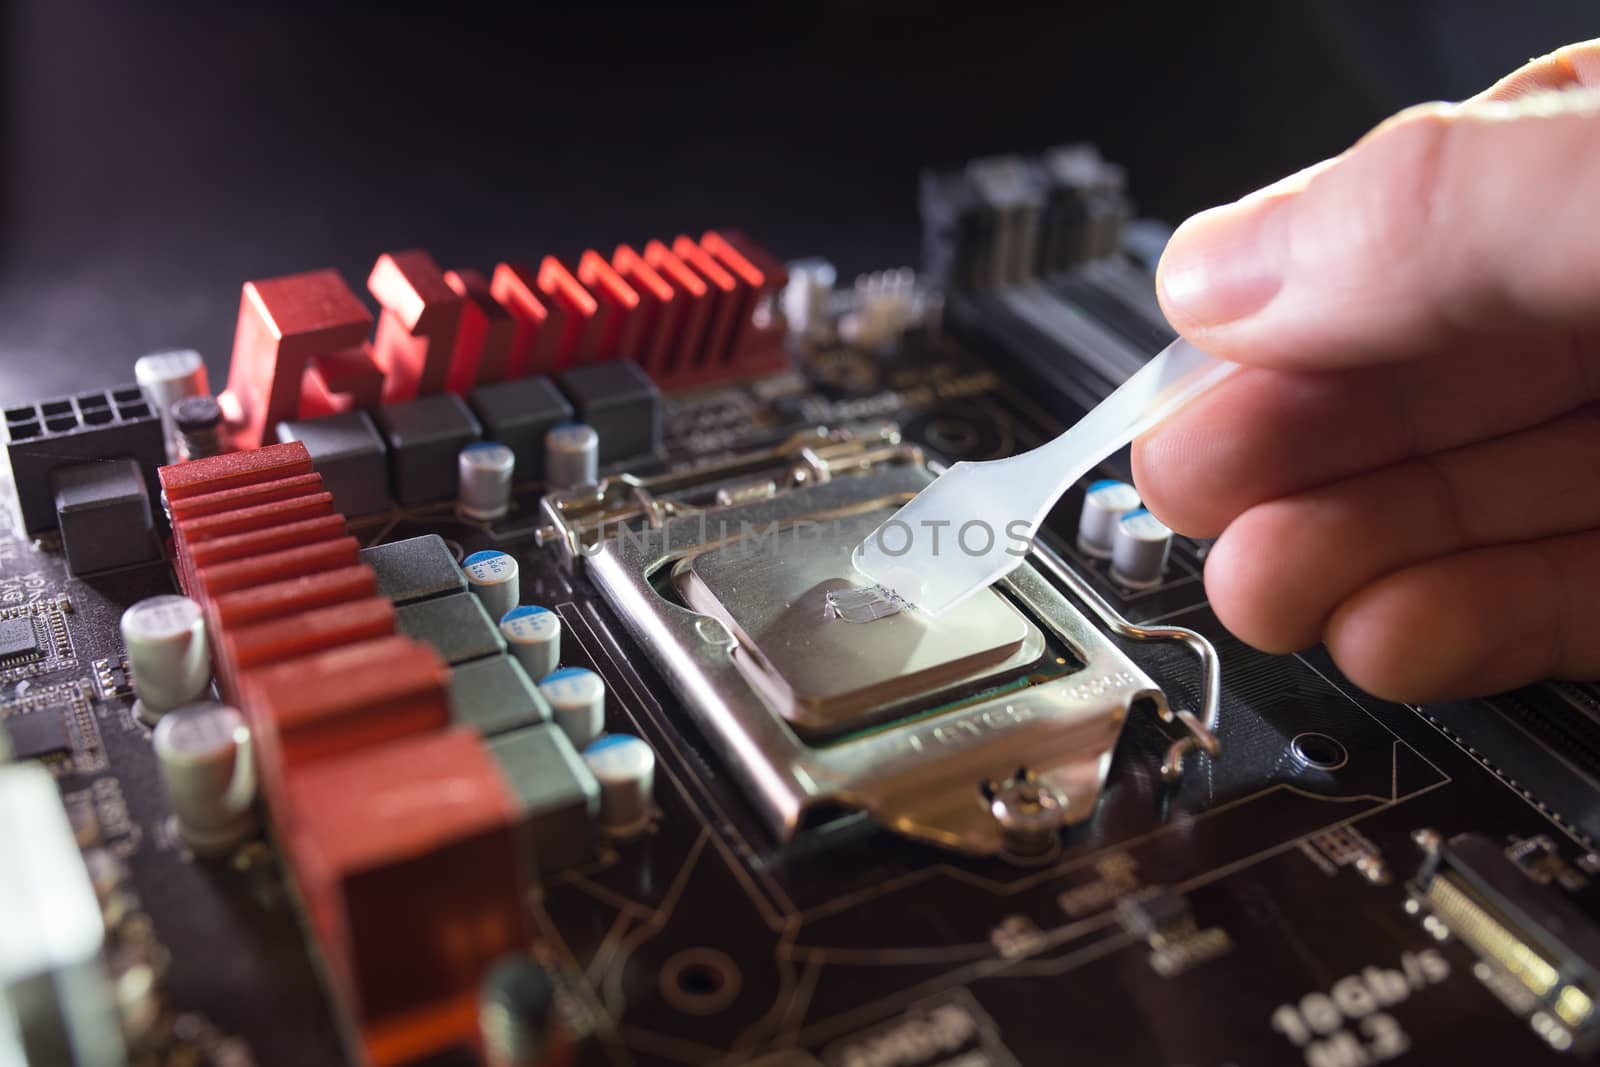 Application of thermal paste on the laptop processor chip for high-quality cooling. Spreading thermal compound to iprove cooling performance. Upgrade or PC repair concept. by petrsvoboda91